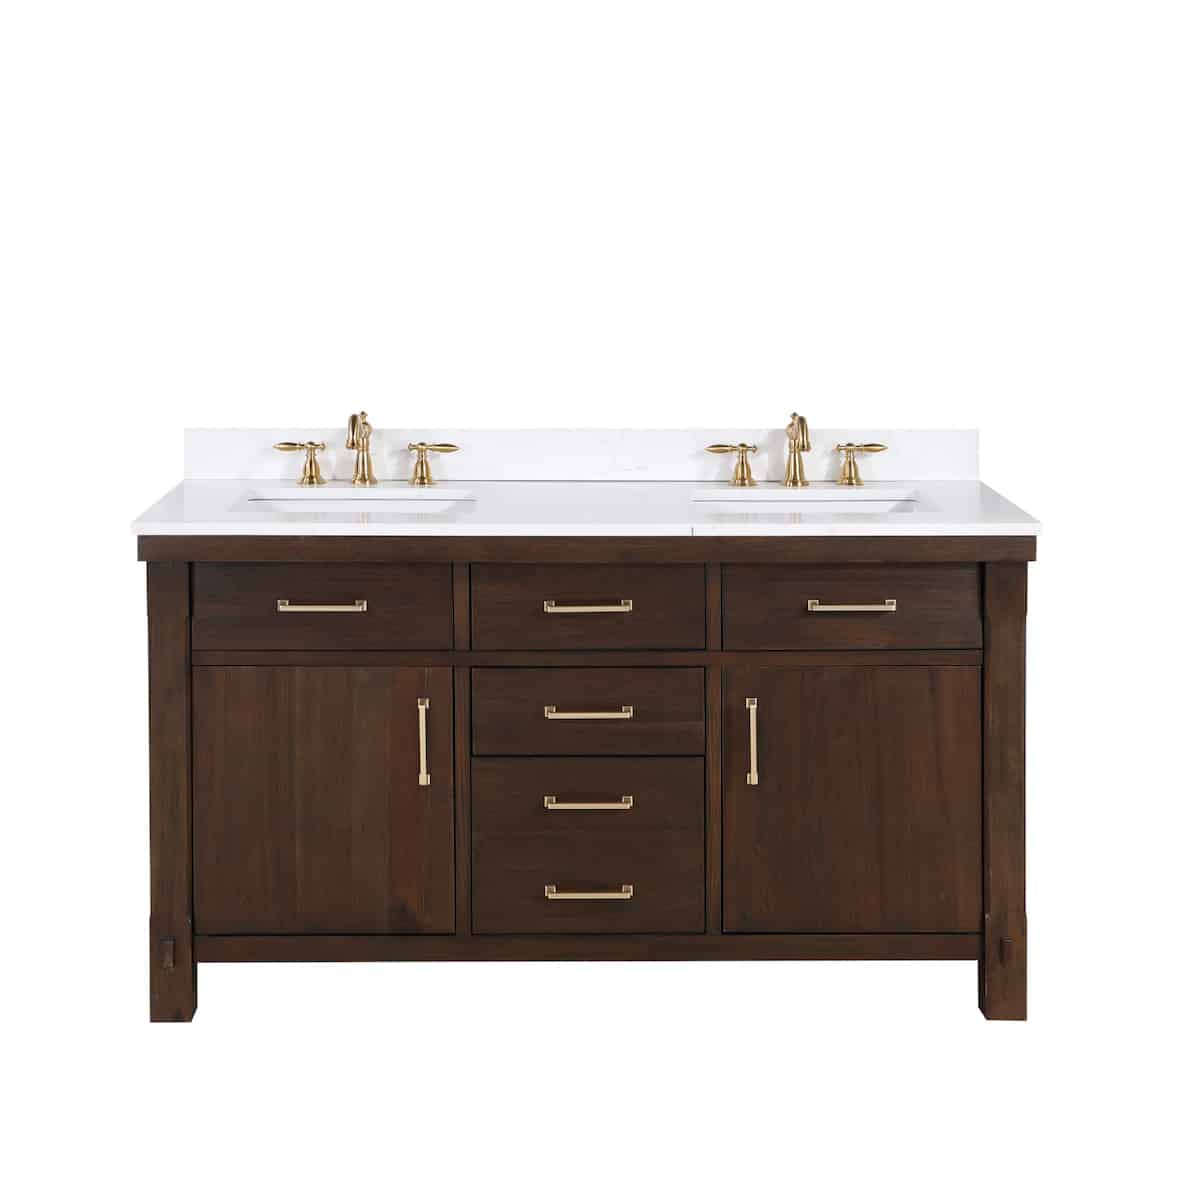 Vinnova Viella 60 Inch Double Sink Bath Vanity in Deep Walnut with White Composite Countertop Without Mirror 701860-DW-WS-NM